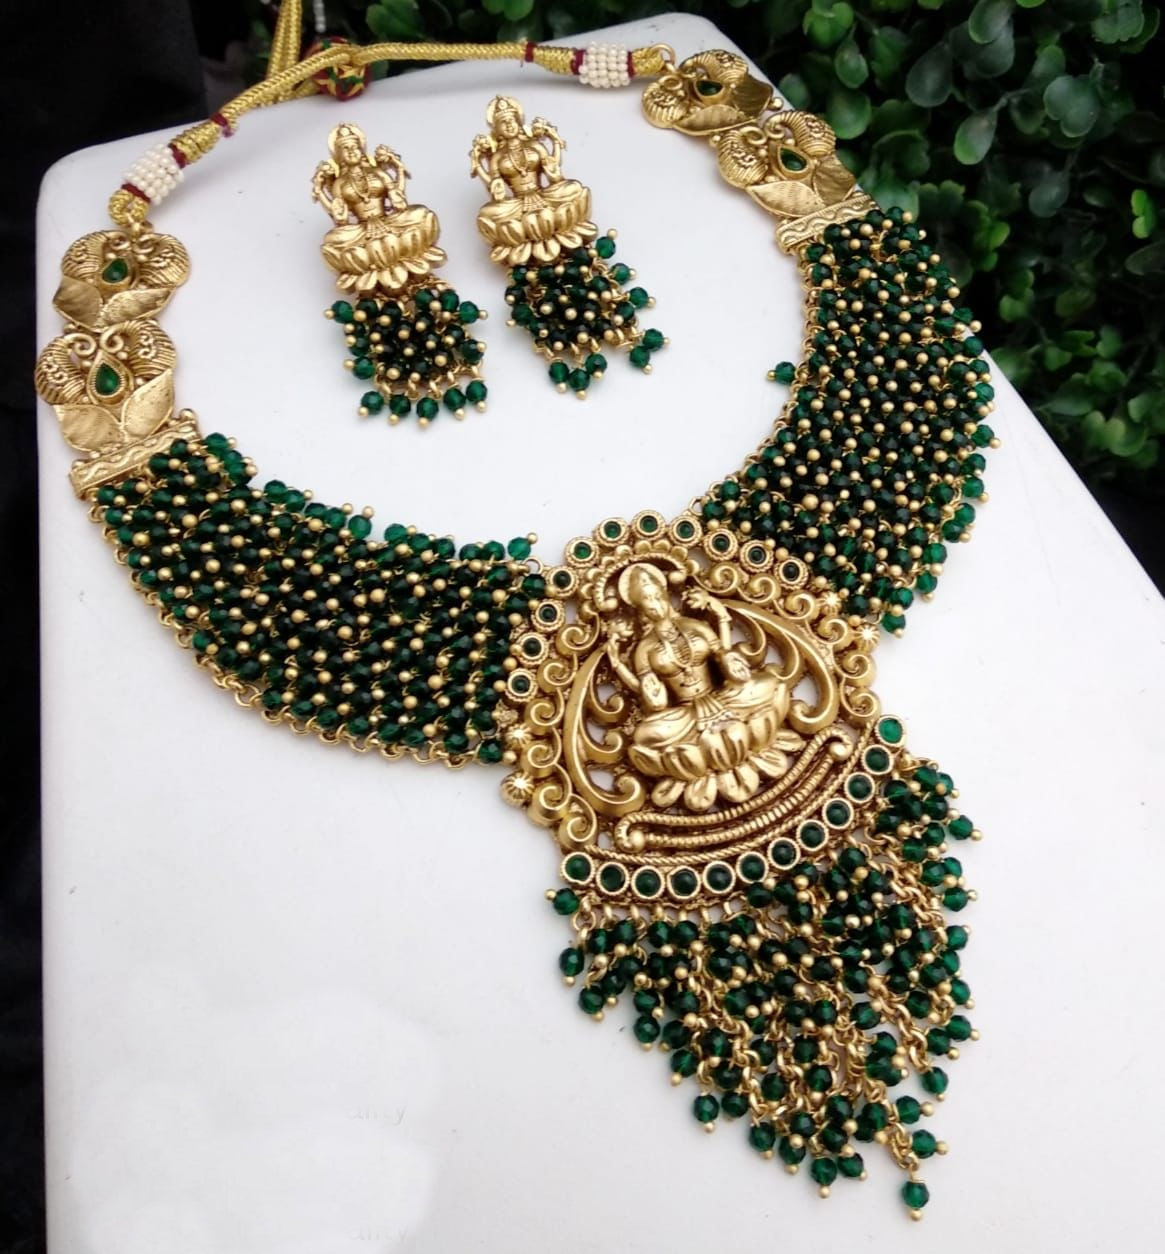 Premium Gold plated Laxmi with colored beads Short Necklace Set 8183N-Necklace Set-Kanakam-Green beads-Griiham